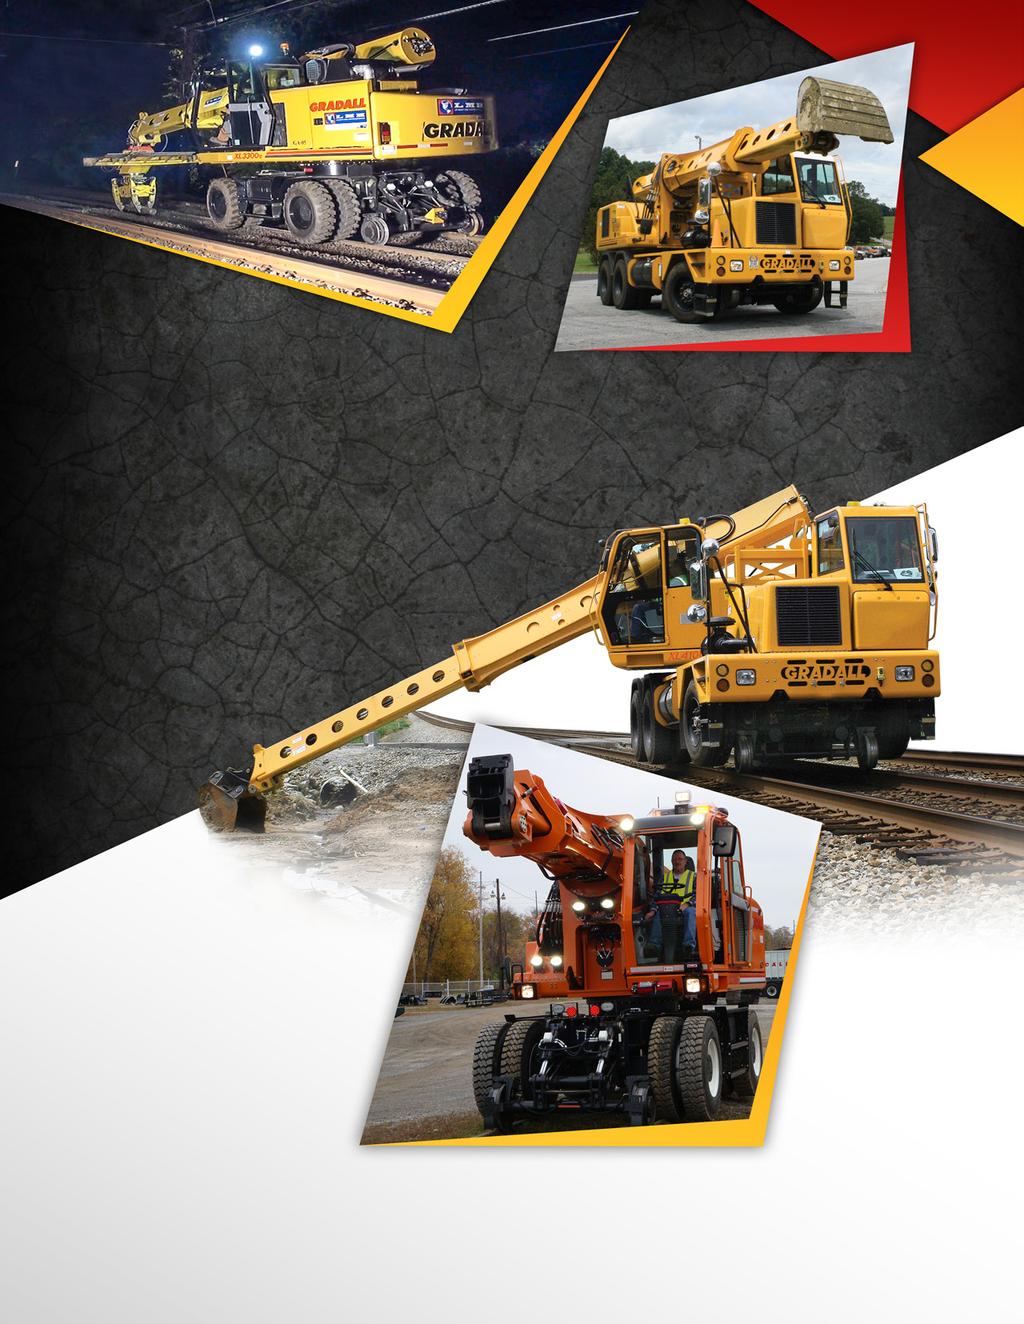 ATTACHMENTS TO EXPAND YOUR VERSATILITY Excavating buckets Dredging bucket Grading blade Hydraulic hammer Sleeper changer Track undercutters Ballast broom Grapple Tree limb shear Ditching buckets